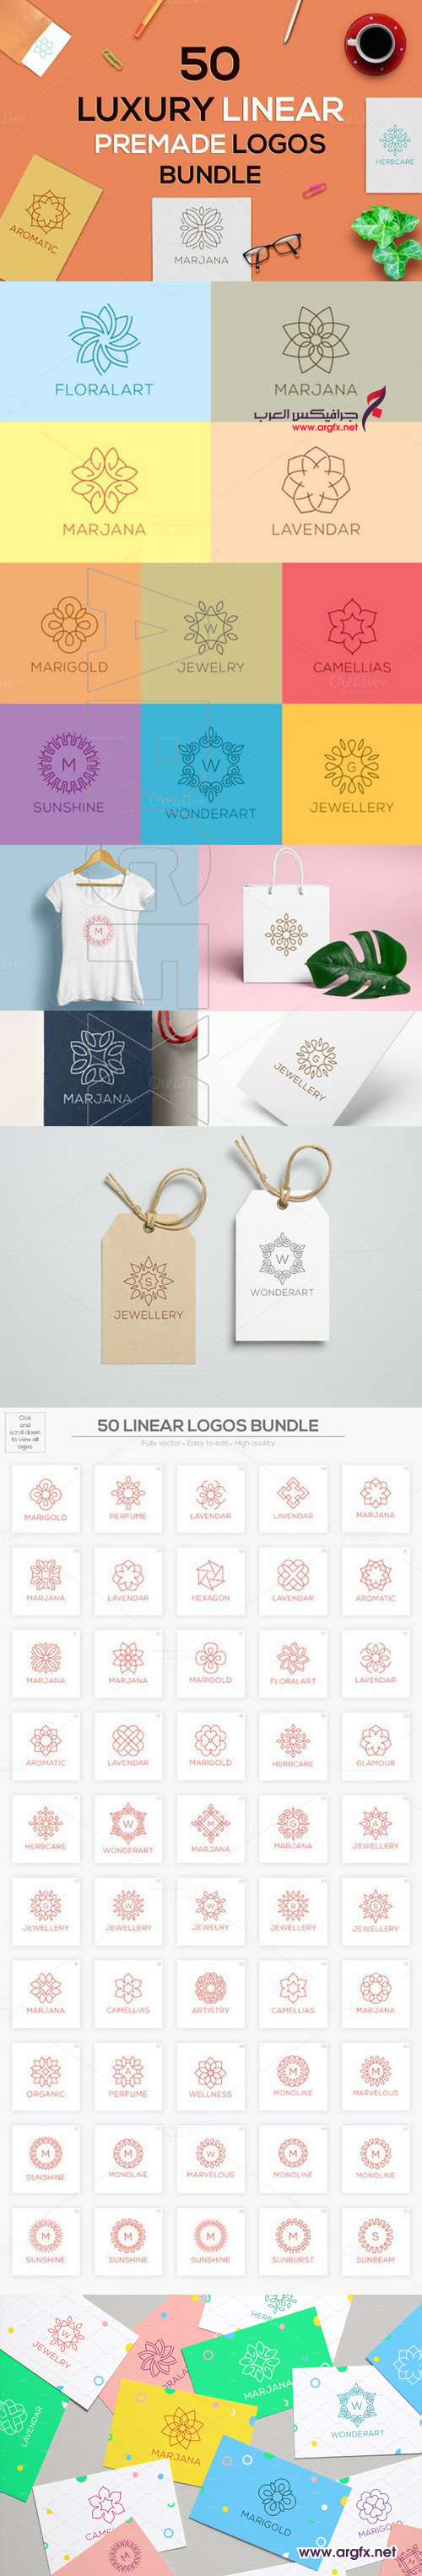 50 Luxury Linear Premade Logos Pack